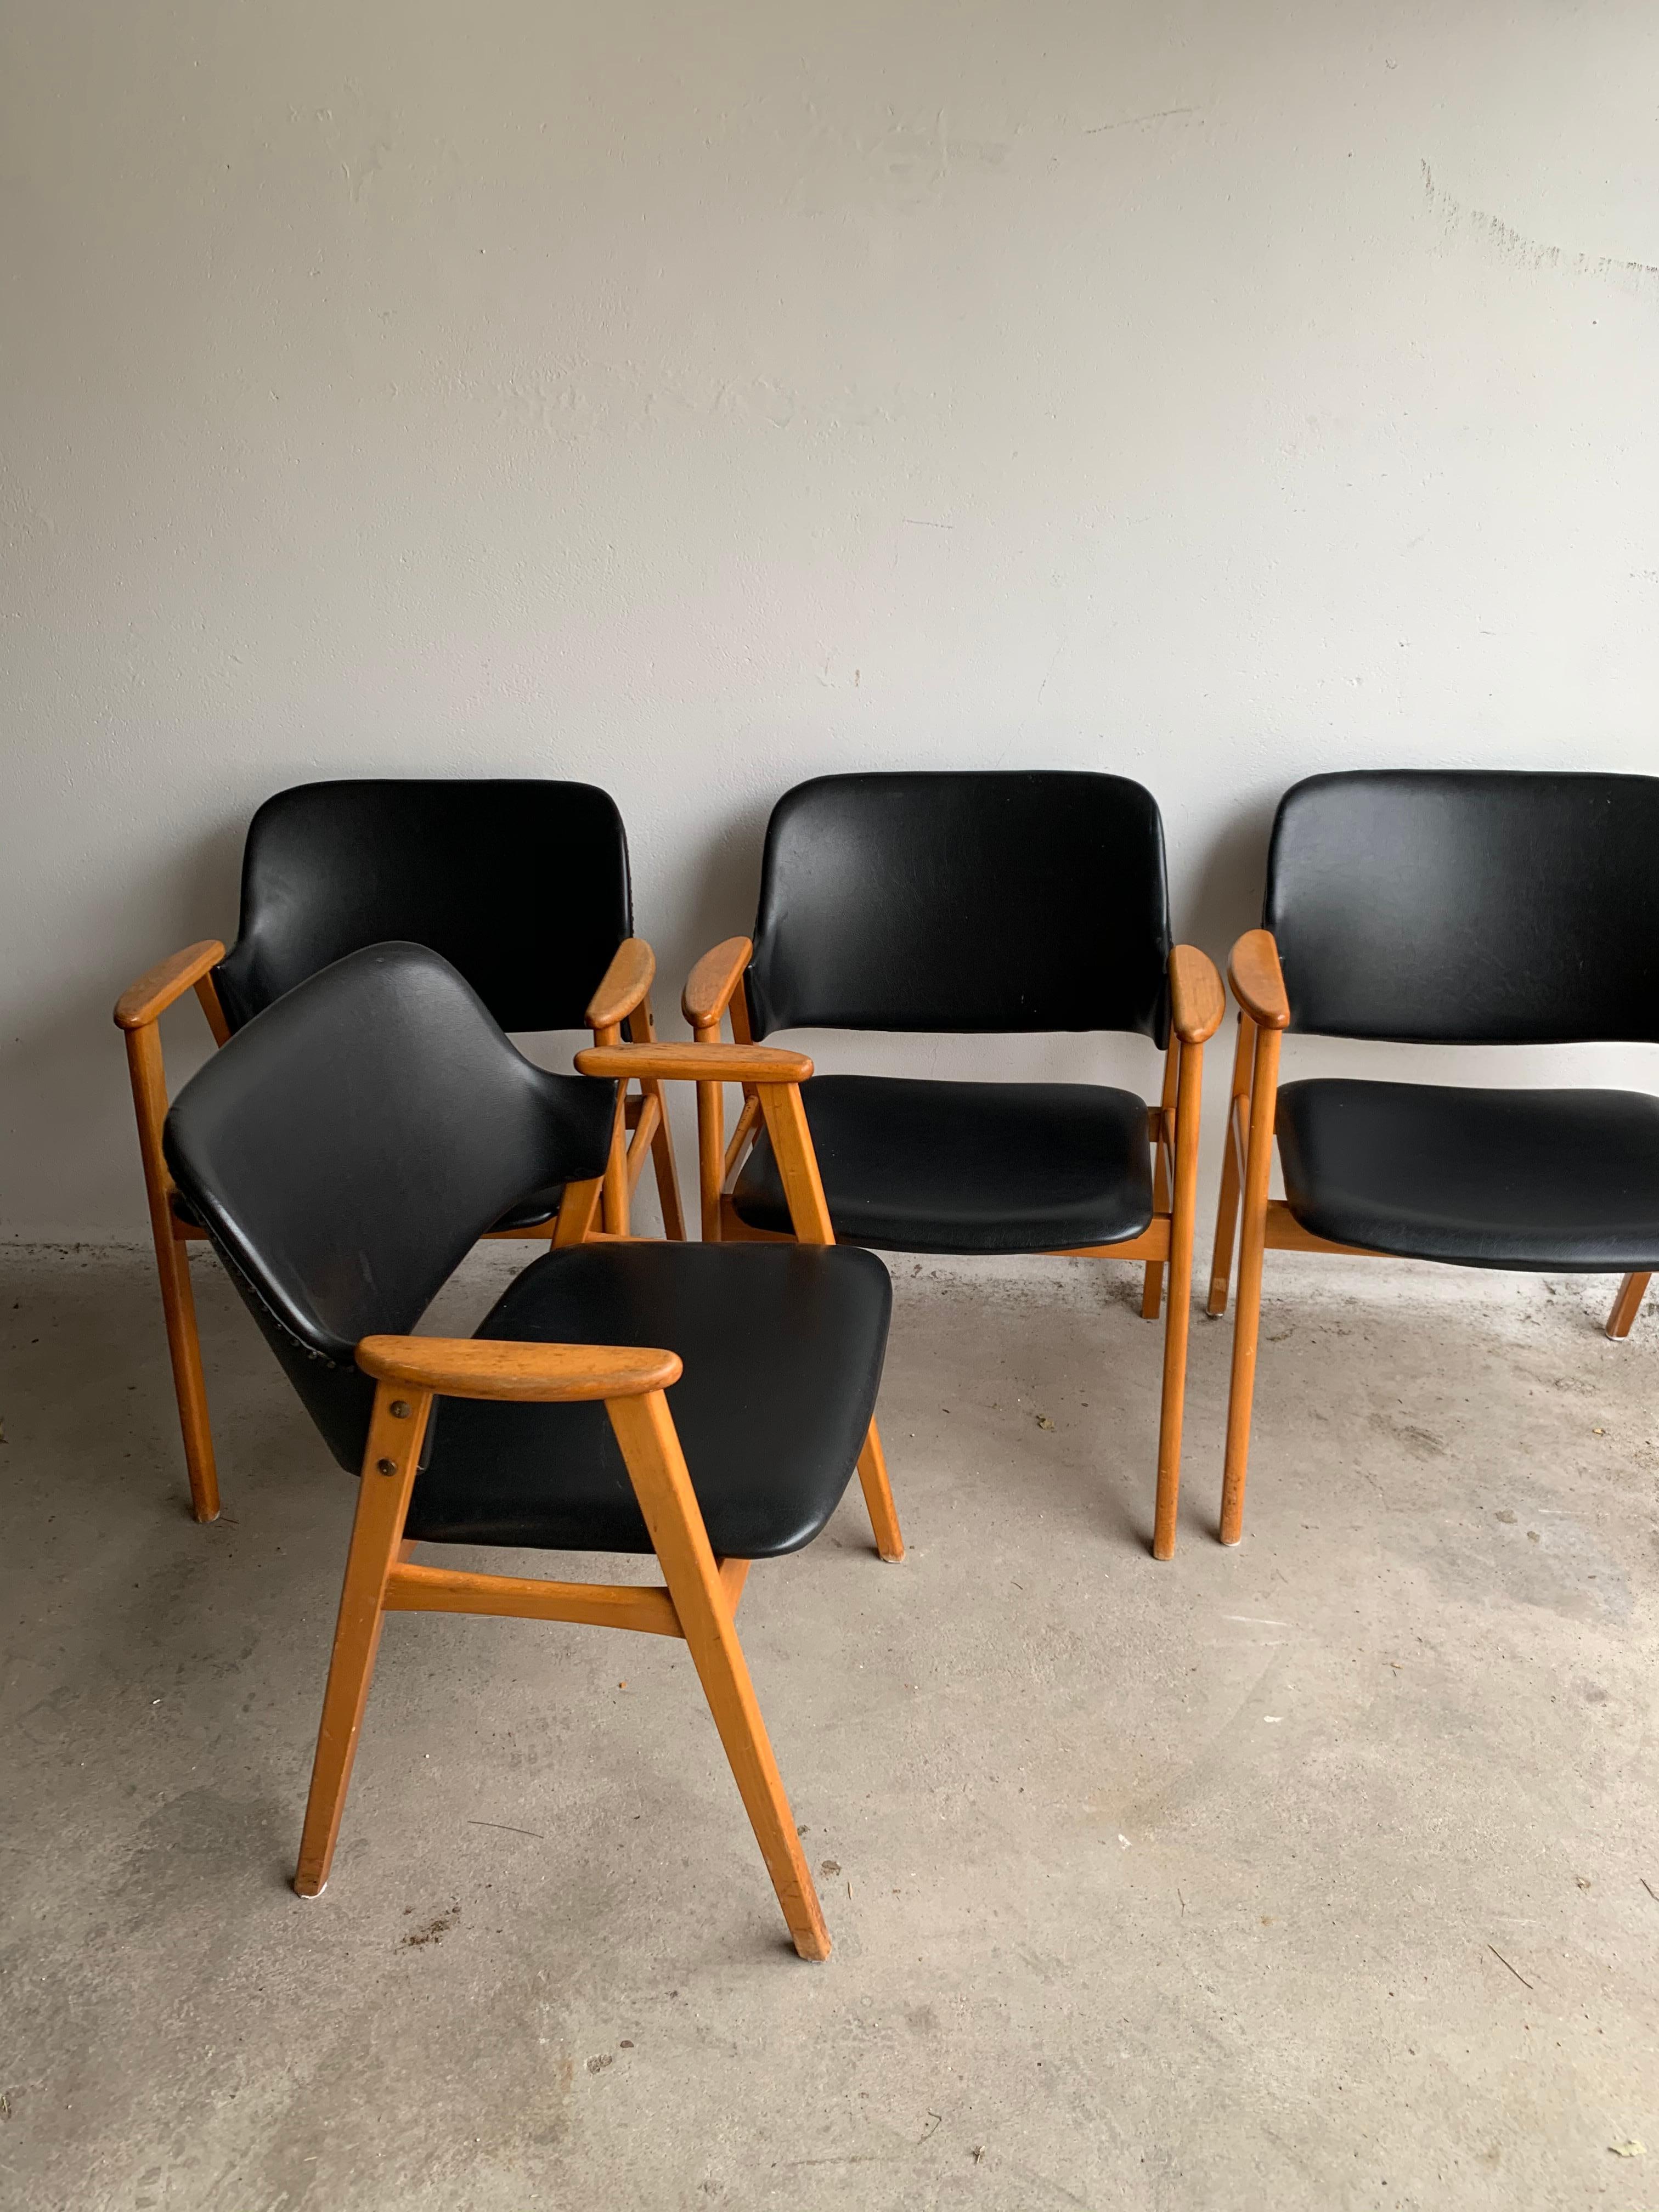 This set of four dining chairs was designed by Cees Braakman and manufactured by Pastoe in the Netherlands in the 1950s. The chairs feature birch frames and original black Skai upholstery. Chairs are in very good original condition. We can